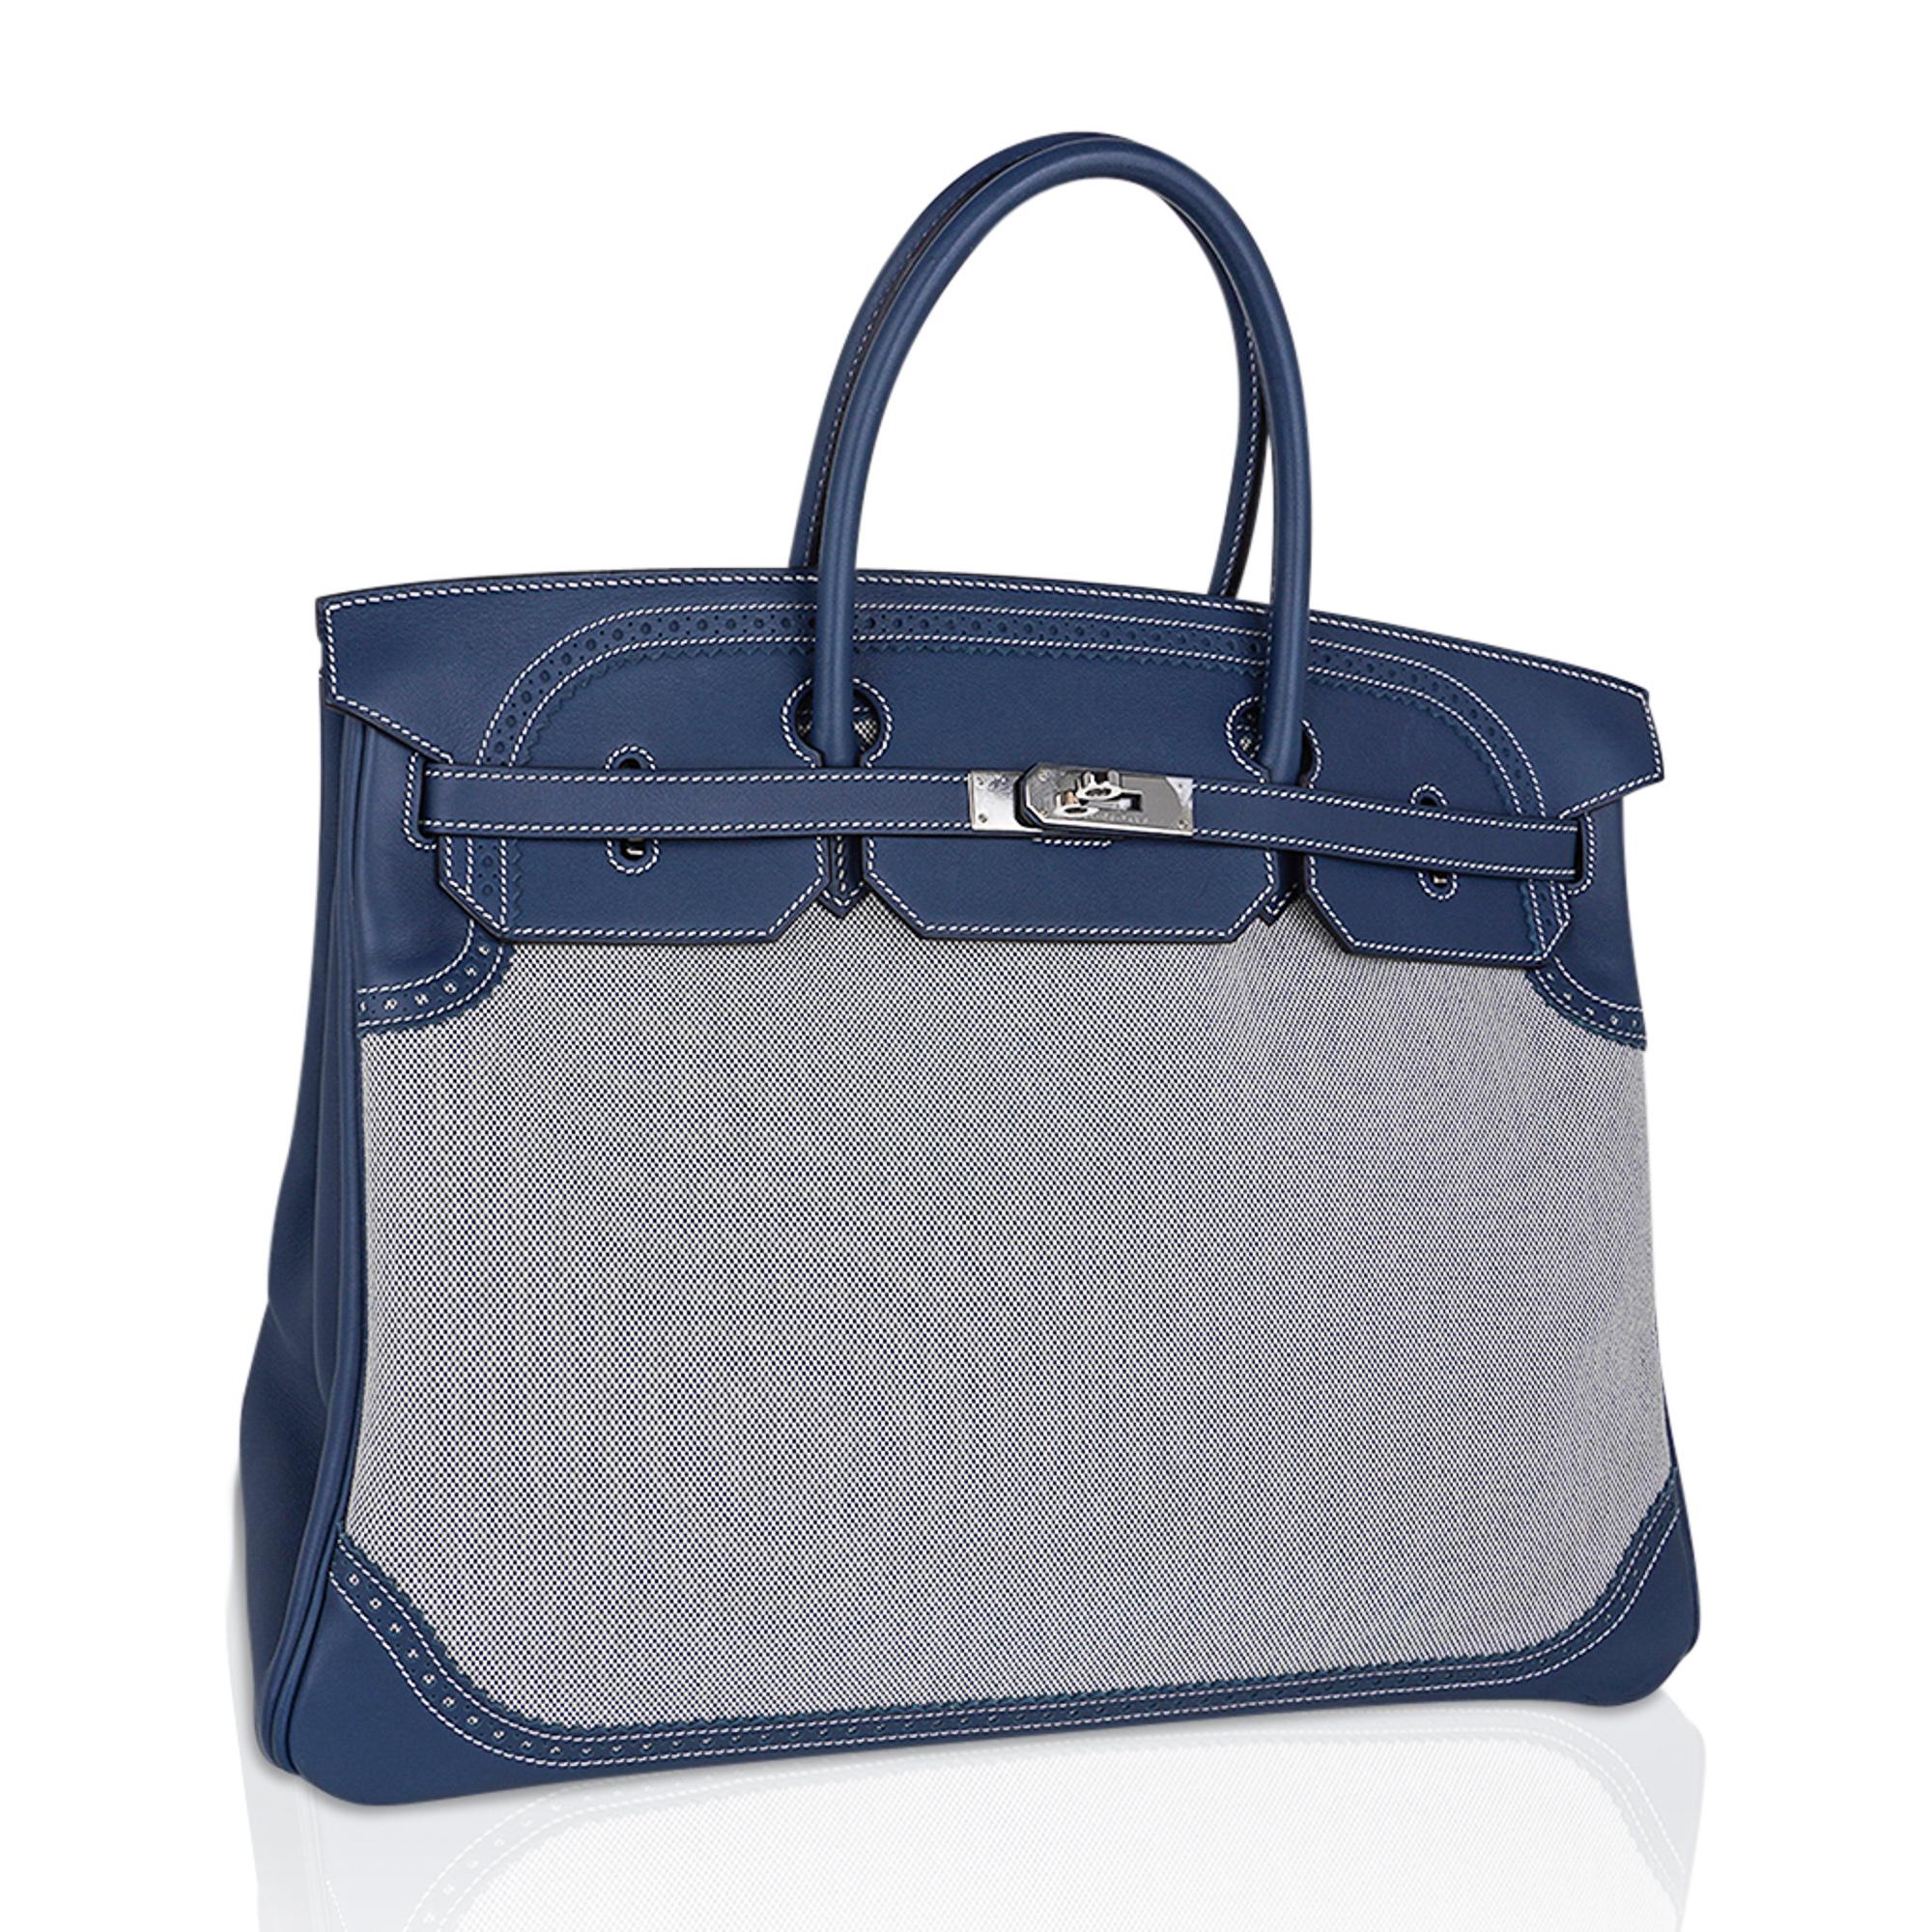 Mightychic offers a limited edition Hermes Birkin 40 Ghillies bag featured in Blue de Prusse with Blue Criss Cross Toile.
Brought to life by Pierre Hardy who drew from his heritage for this rare striking bag.
Exquisite combination with Swift